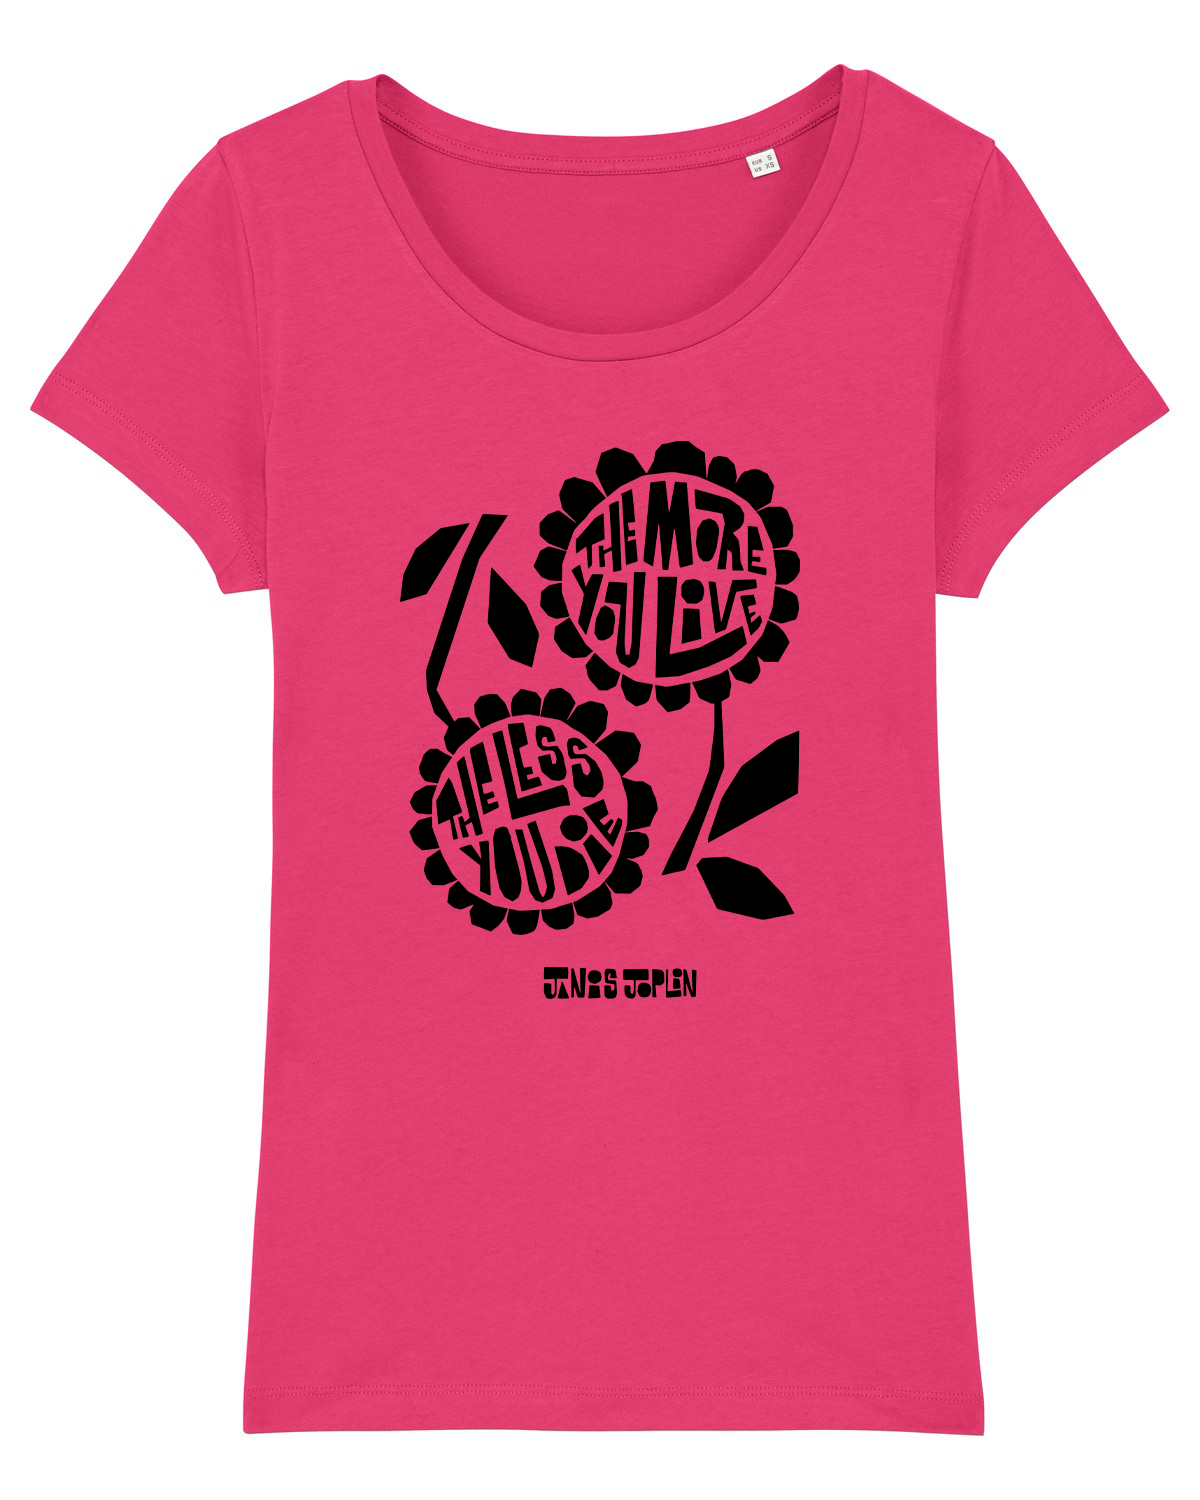 T-shirt bio pour femmes 'The More You Live The Less You Die'